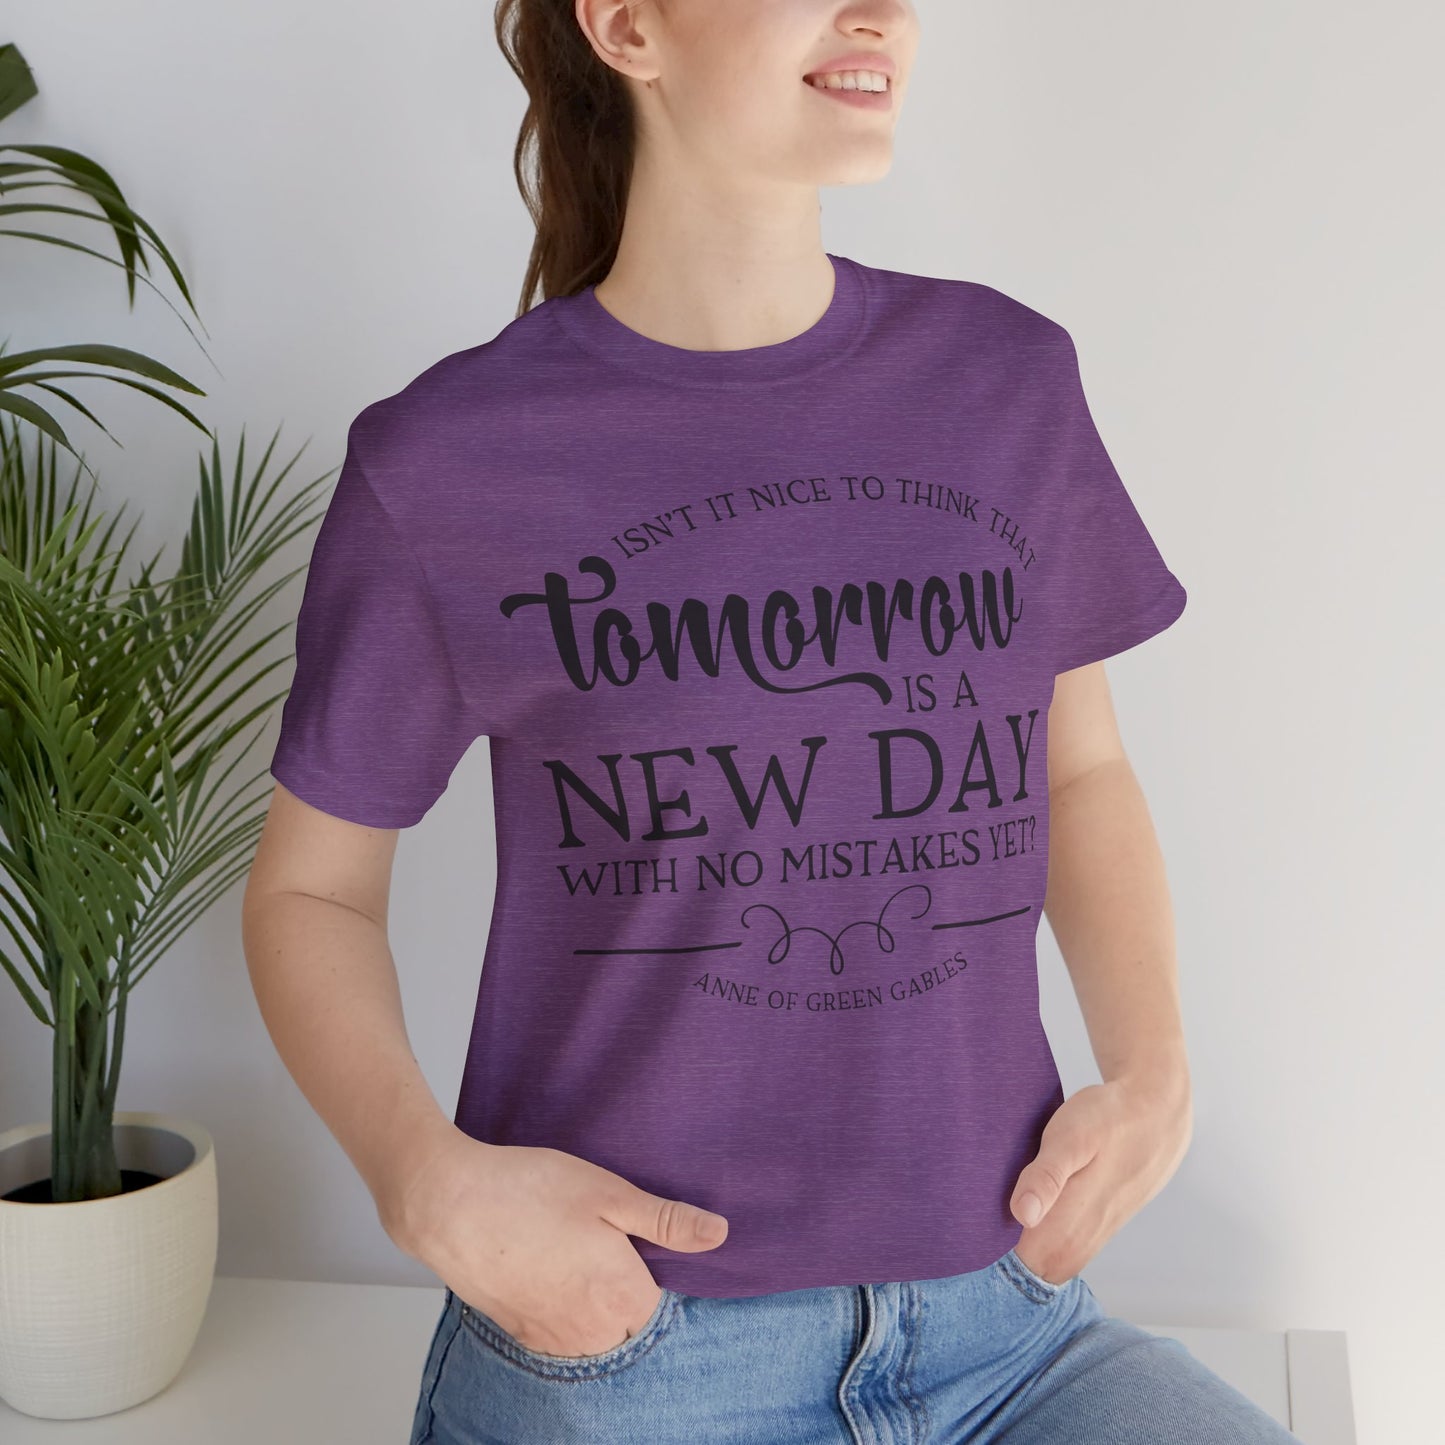 Tomorrow Is a New Day - Anne of Green Gables T-shirt